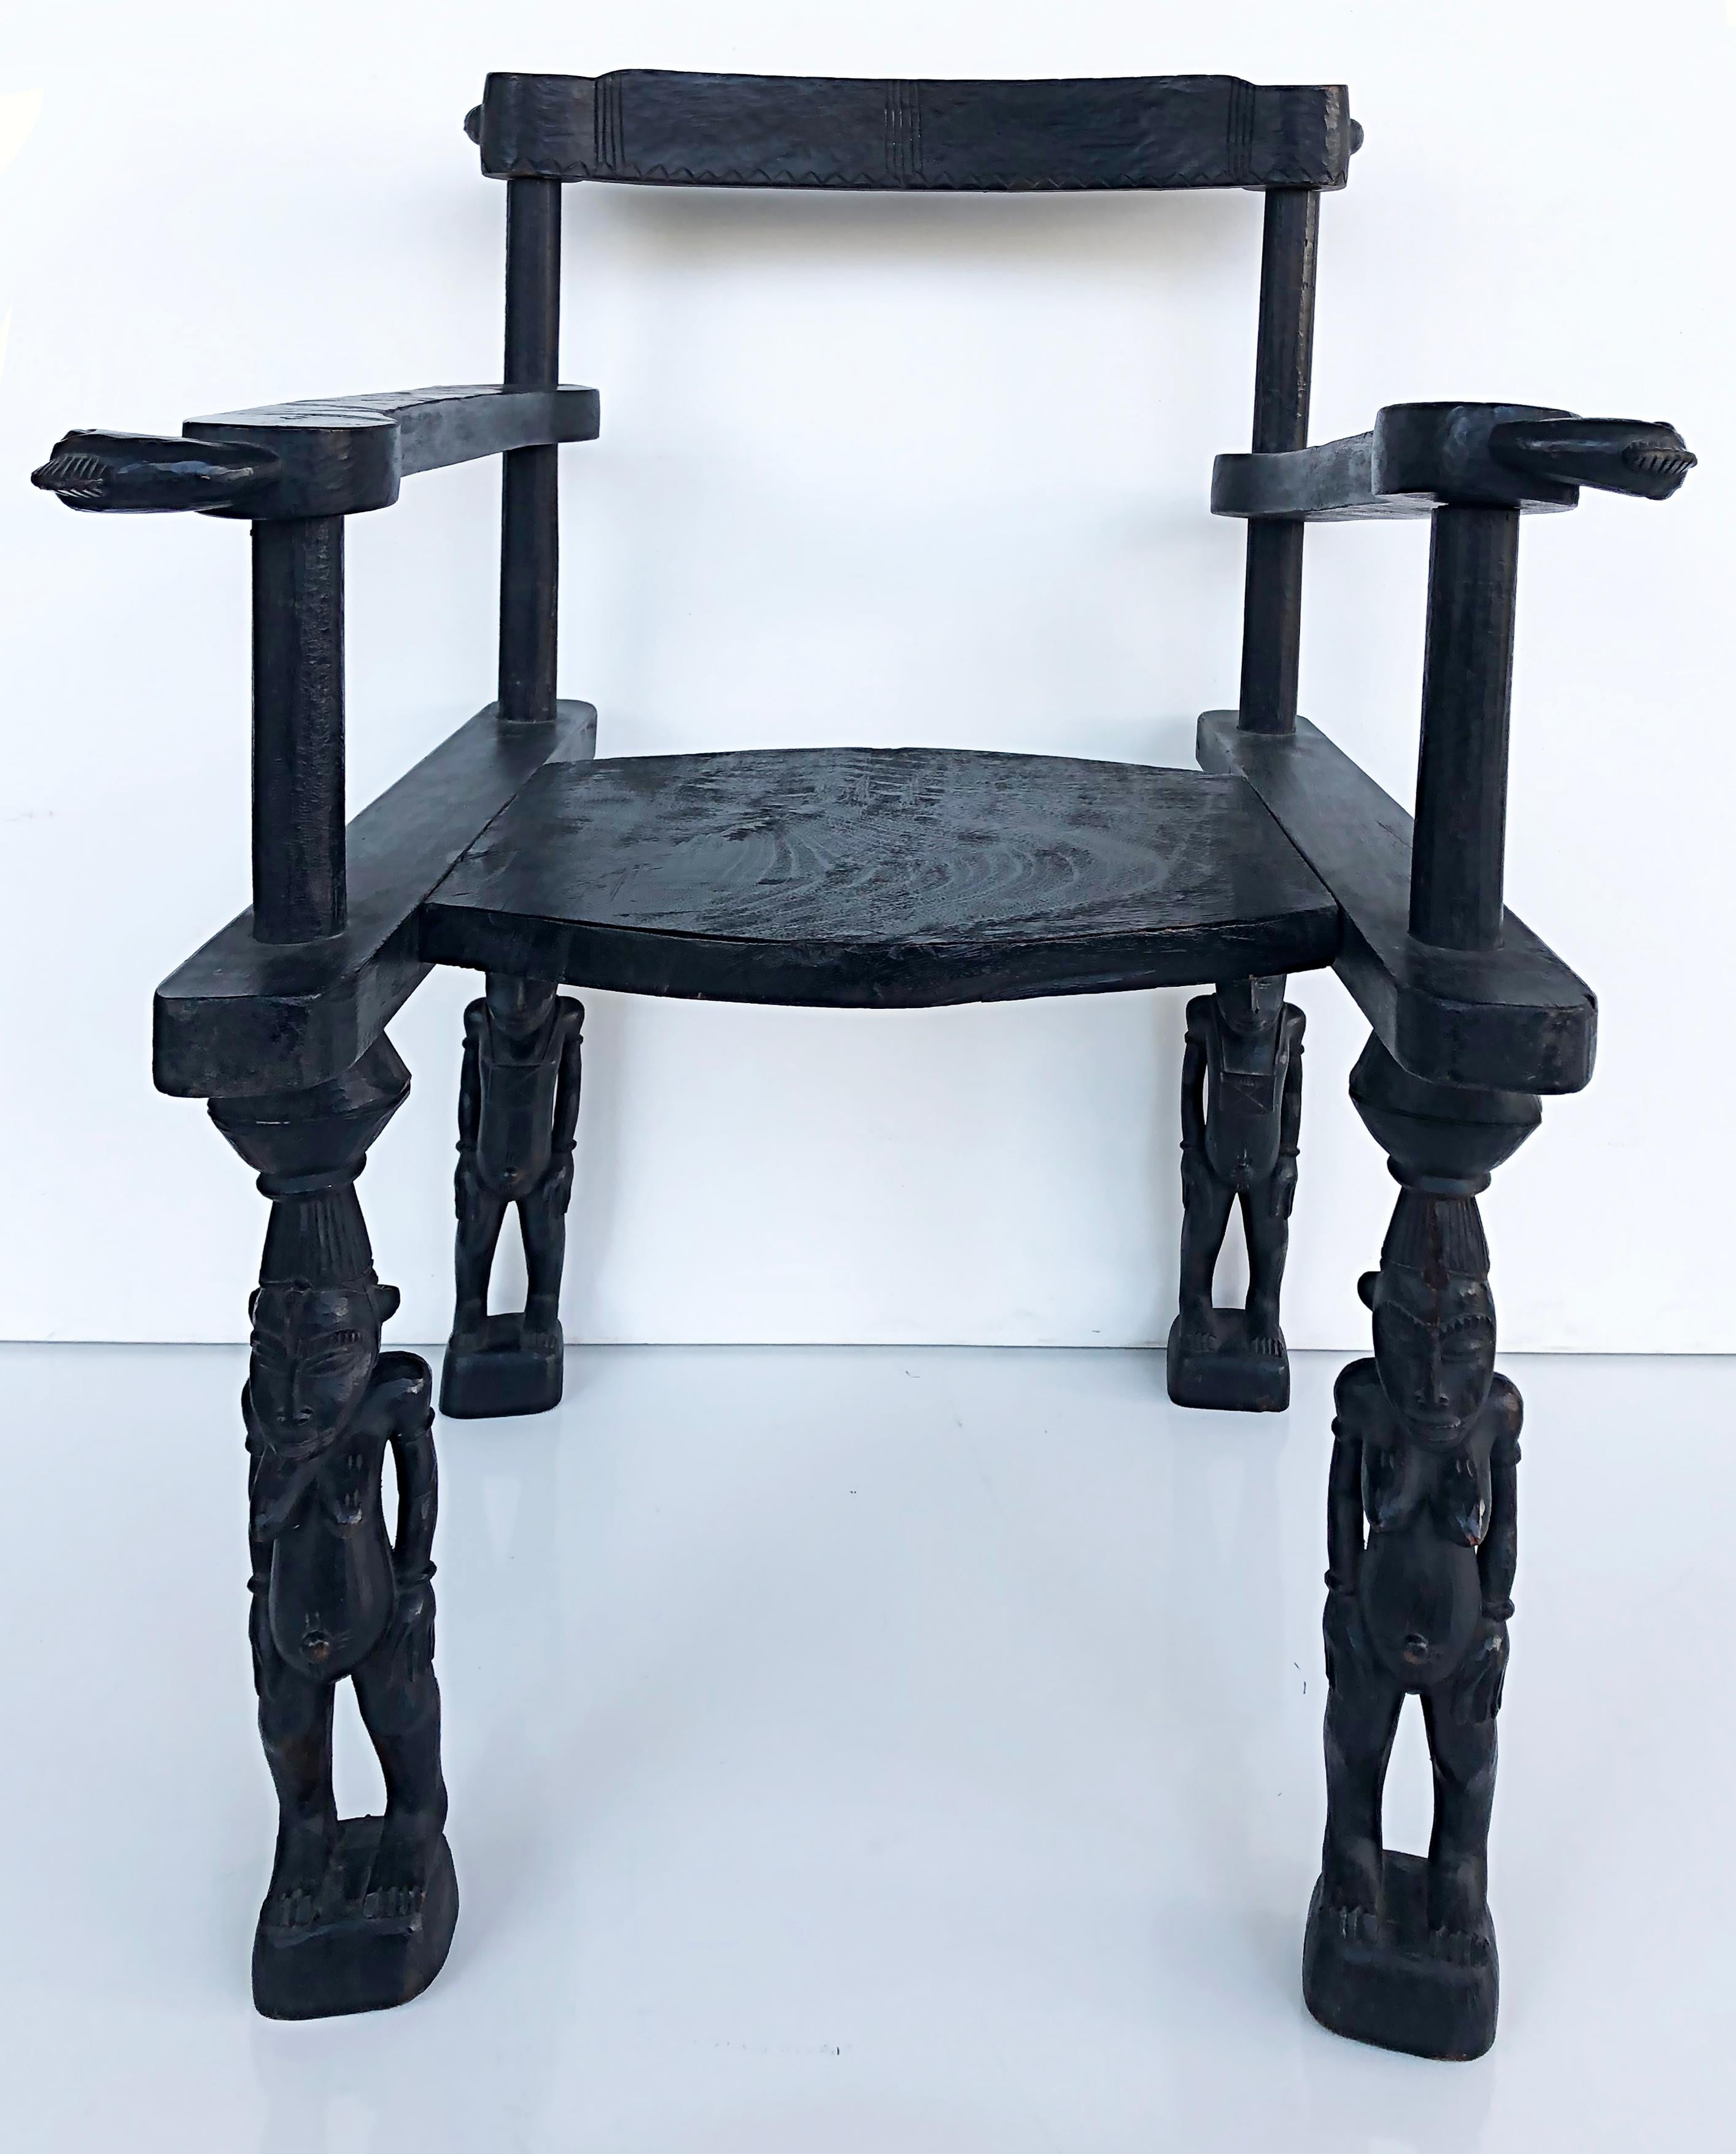 African (Cote d'Ivoire) Senufo Sculptural Nobility Stylke Armchair, Modern

Offered for sale is a Modern 20th-century African sculptural nobility armchair from Cote d'Ivoire from the Senufo People. This wonderful chair has been created by the Senufo